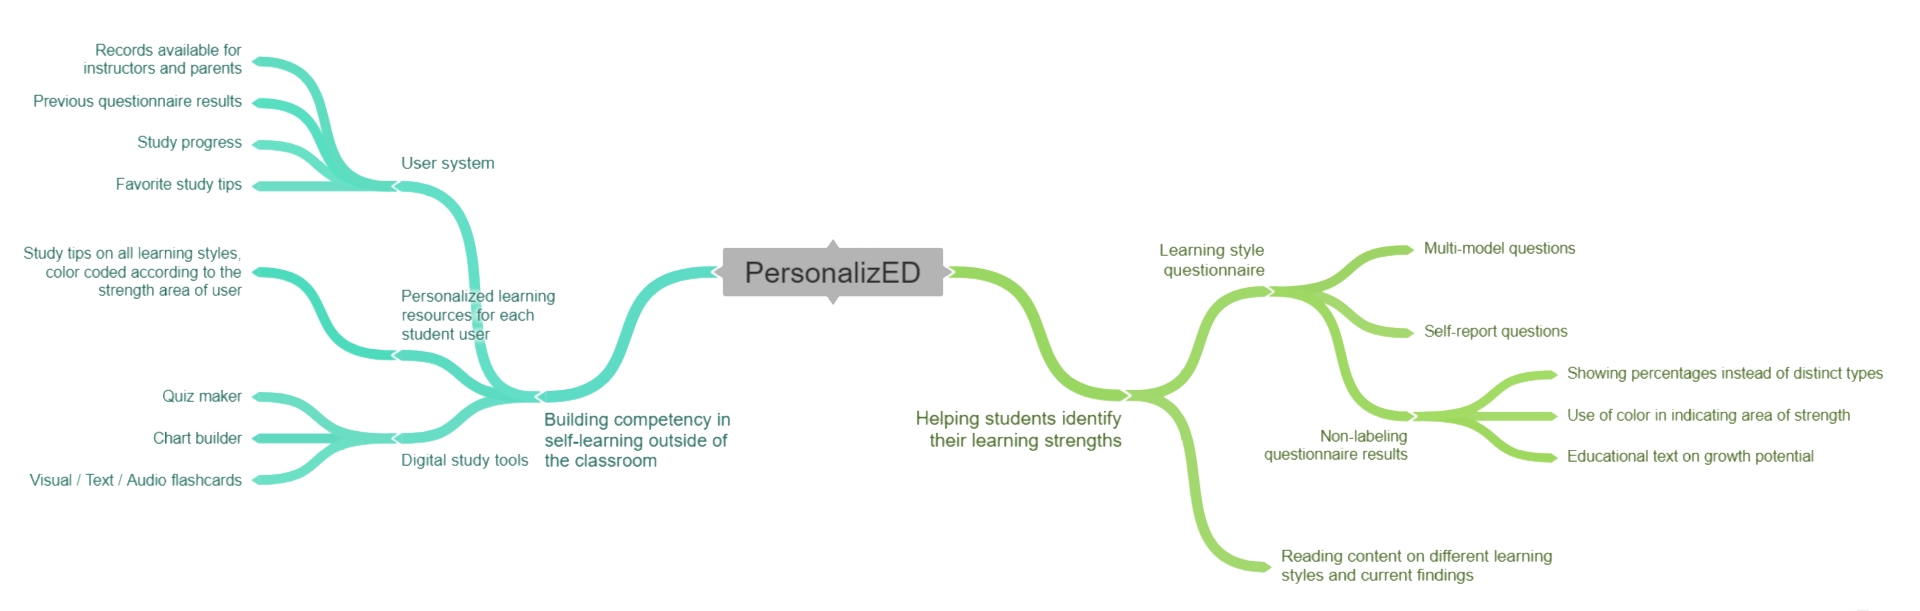 mind map of functions